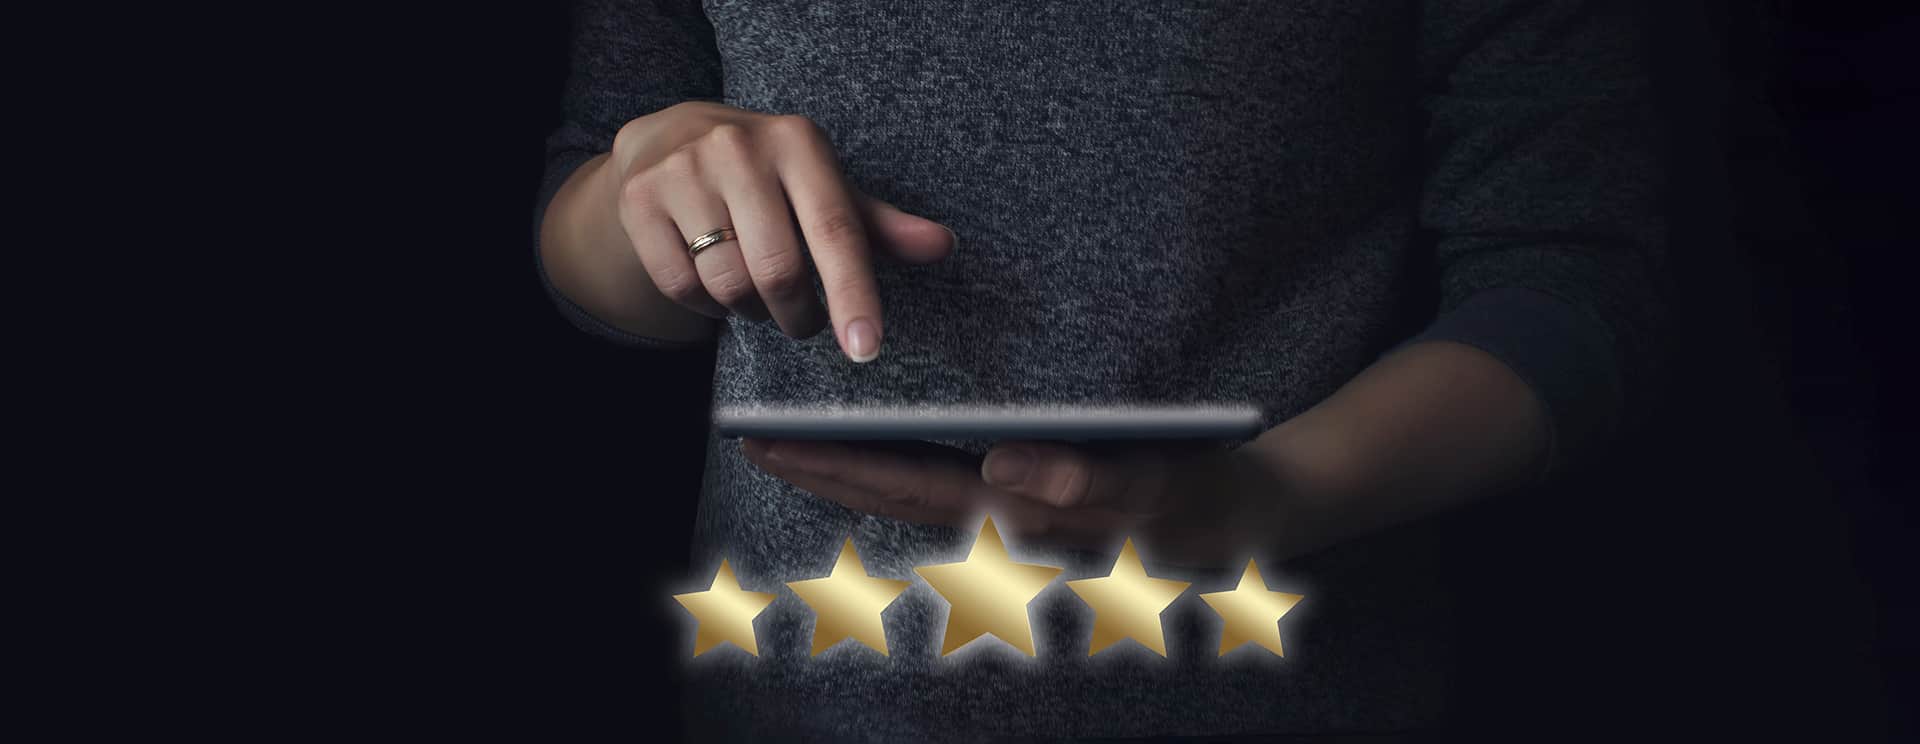 Complexity Science Hub: What role does gender play for online platform reviews?